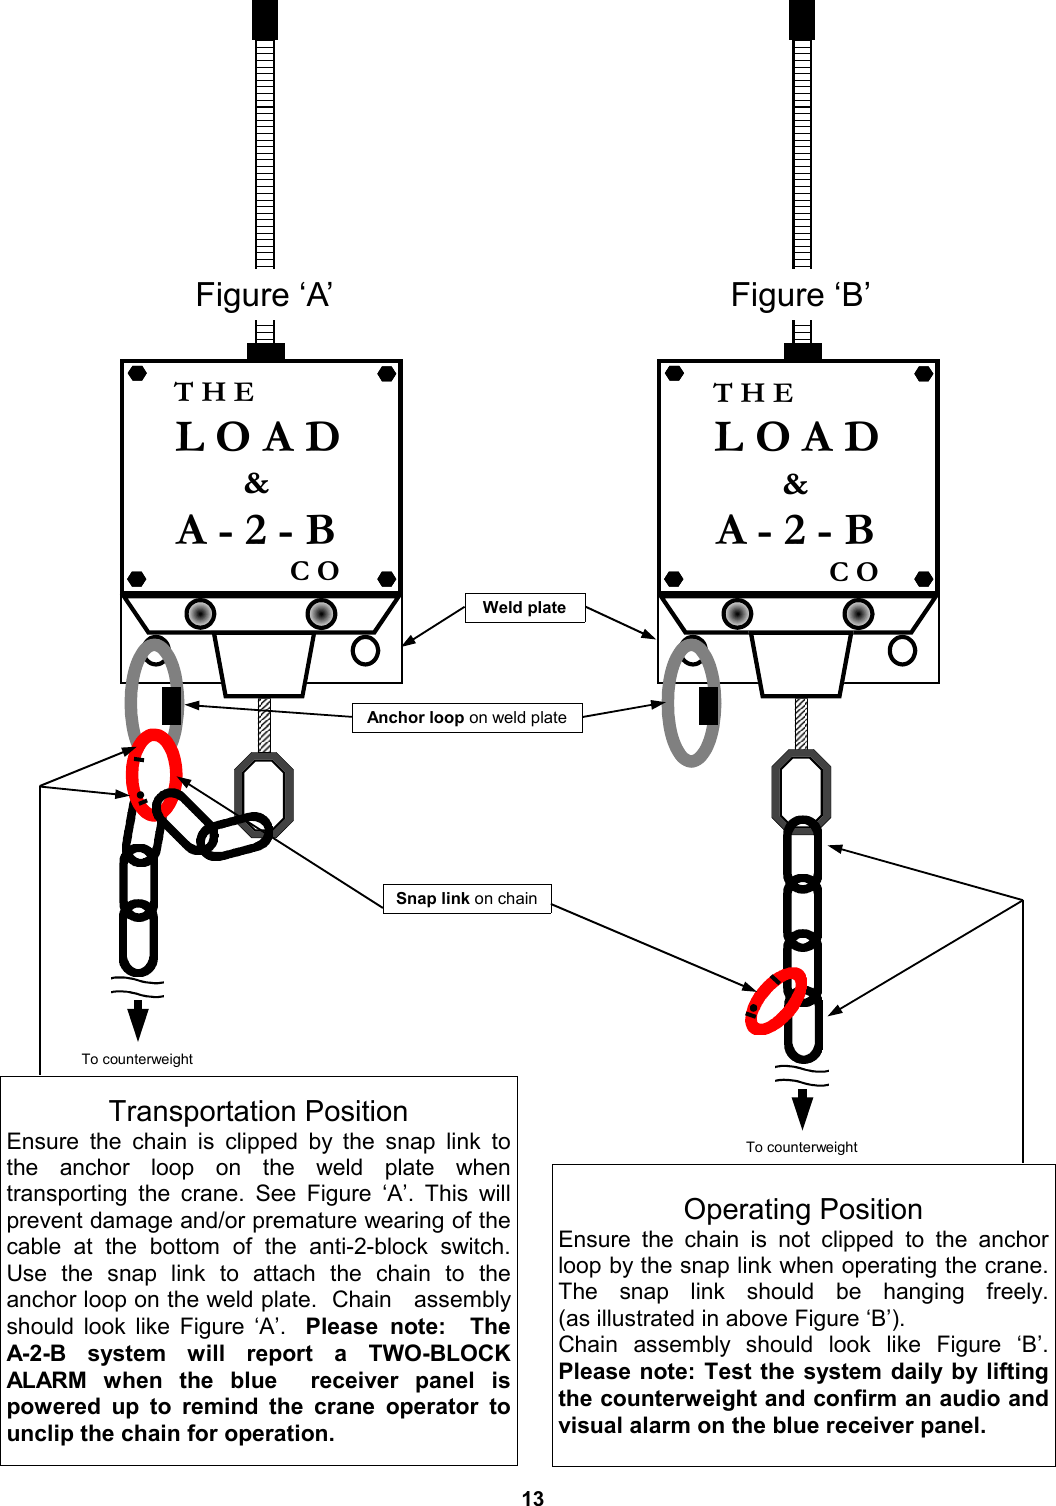 13 L O A D T H E &amp; A - 2 - B C O To counterweight To counterweight Figure ‘A’  Figure ‘B’ Transportation Position Ensure the chain is clipped by the snap link to the  anchor  loop  on  the  weld  plate  when         transporting the crane. See Figure ‘A’. This will prevent damage and/or premature wearing of the cable at the bottom of the anti-2-block switch.  Use the snap link to attach the chain to the      anchor loop on the weld plate.  Chain   assembly should look like Figure ‘A’.  Please note:  The  A-2-B system will report a TWO-BLOCK ALARM when the blue  receiver panel is    powered up to remind the crane operator to unclip the chain for operation. Anchor loop on weld plate Snap link on chain Operating Position Ensure the chain is not clipped to the anchor loop by the snap link when operating the crane.  The  snap  link  should  be  hanging  freely.          (as illustrated in above Figure ‘B’).   Chain assembly should look like Figure ‘B’.  Please note: Test the system daily by lifting the counterweight and confirm an audio and visual alarm on the blue receiver panel. Weld plate L O A D T H E &amp; A - 2 - B C O 